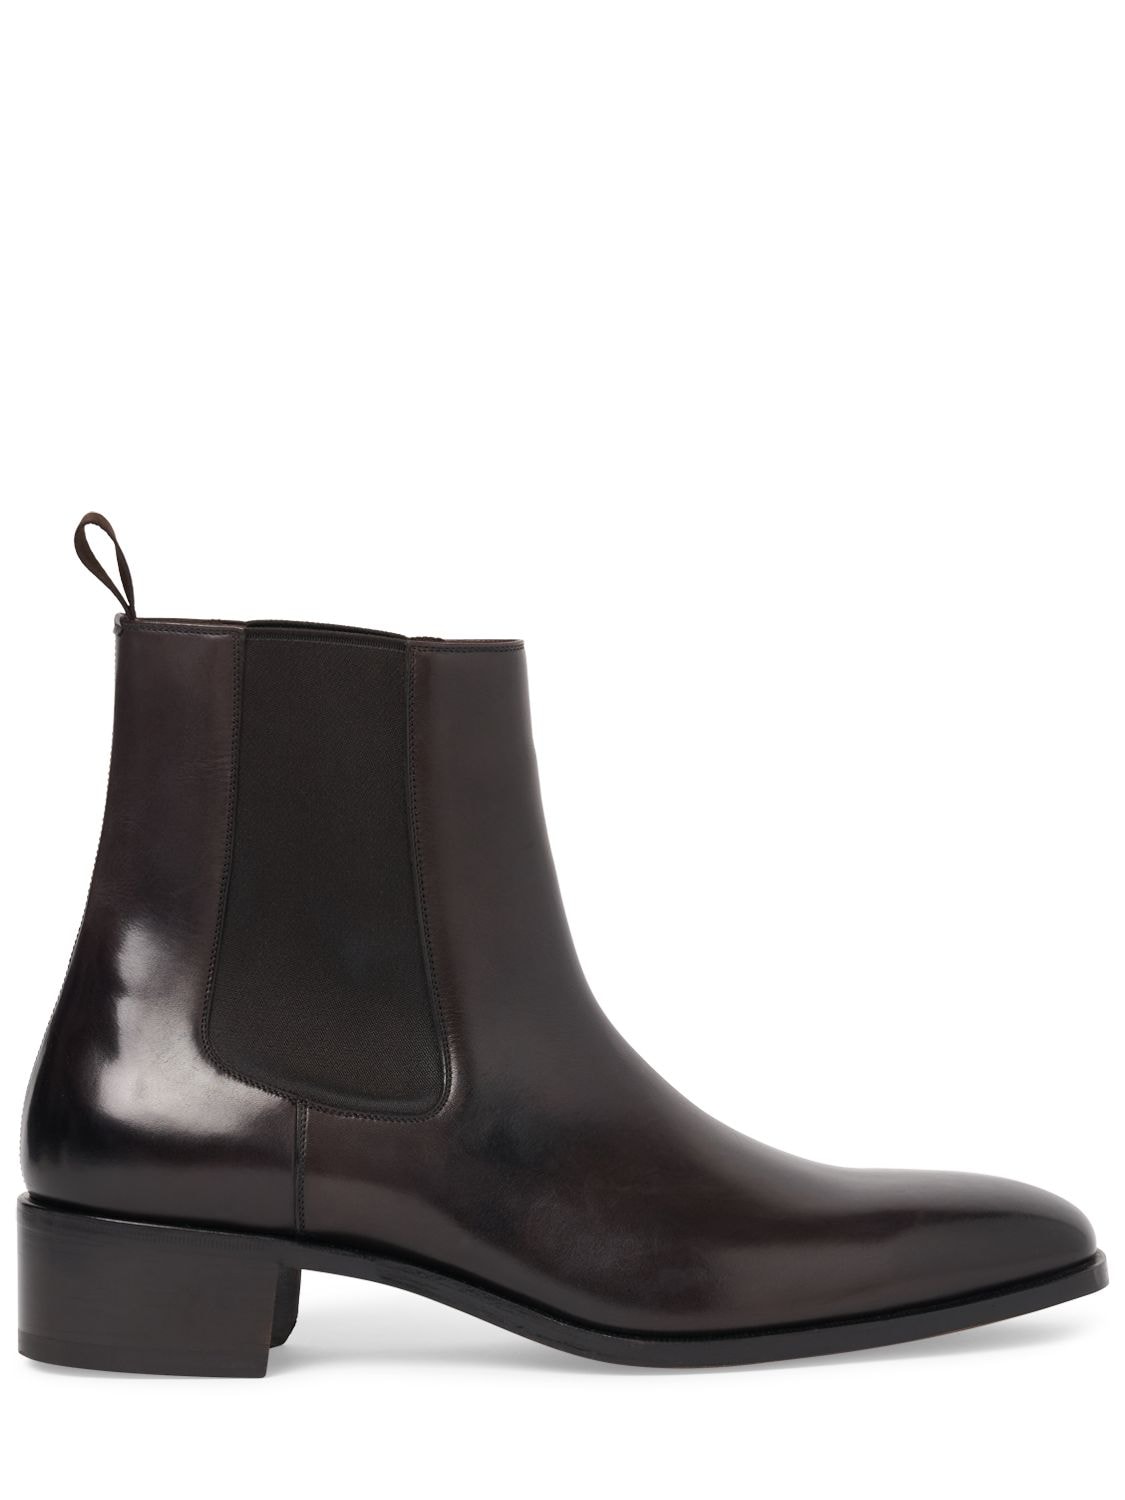 Tom Ford Alec Leather Chelsea Boots In Ebony